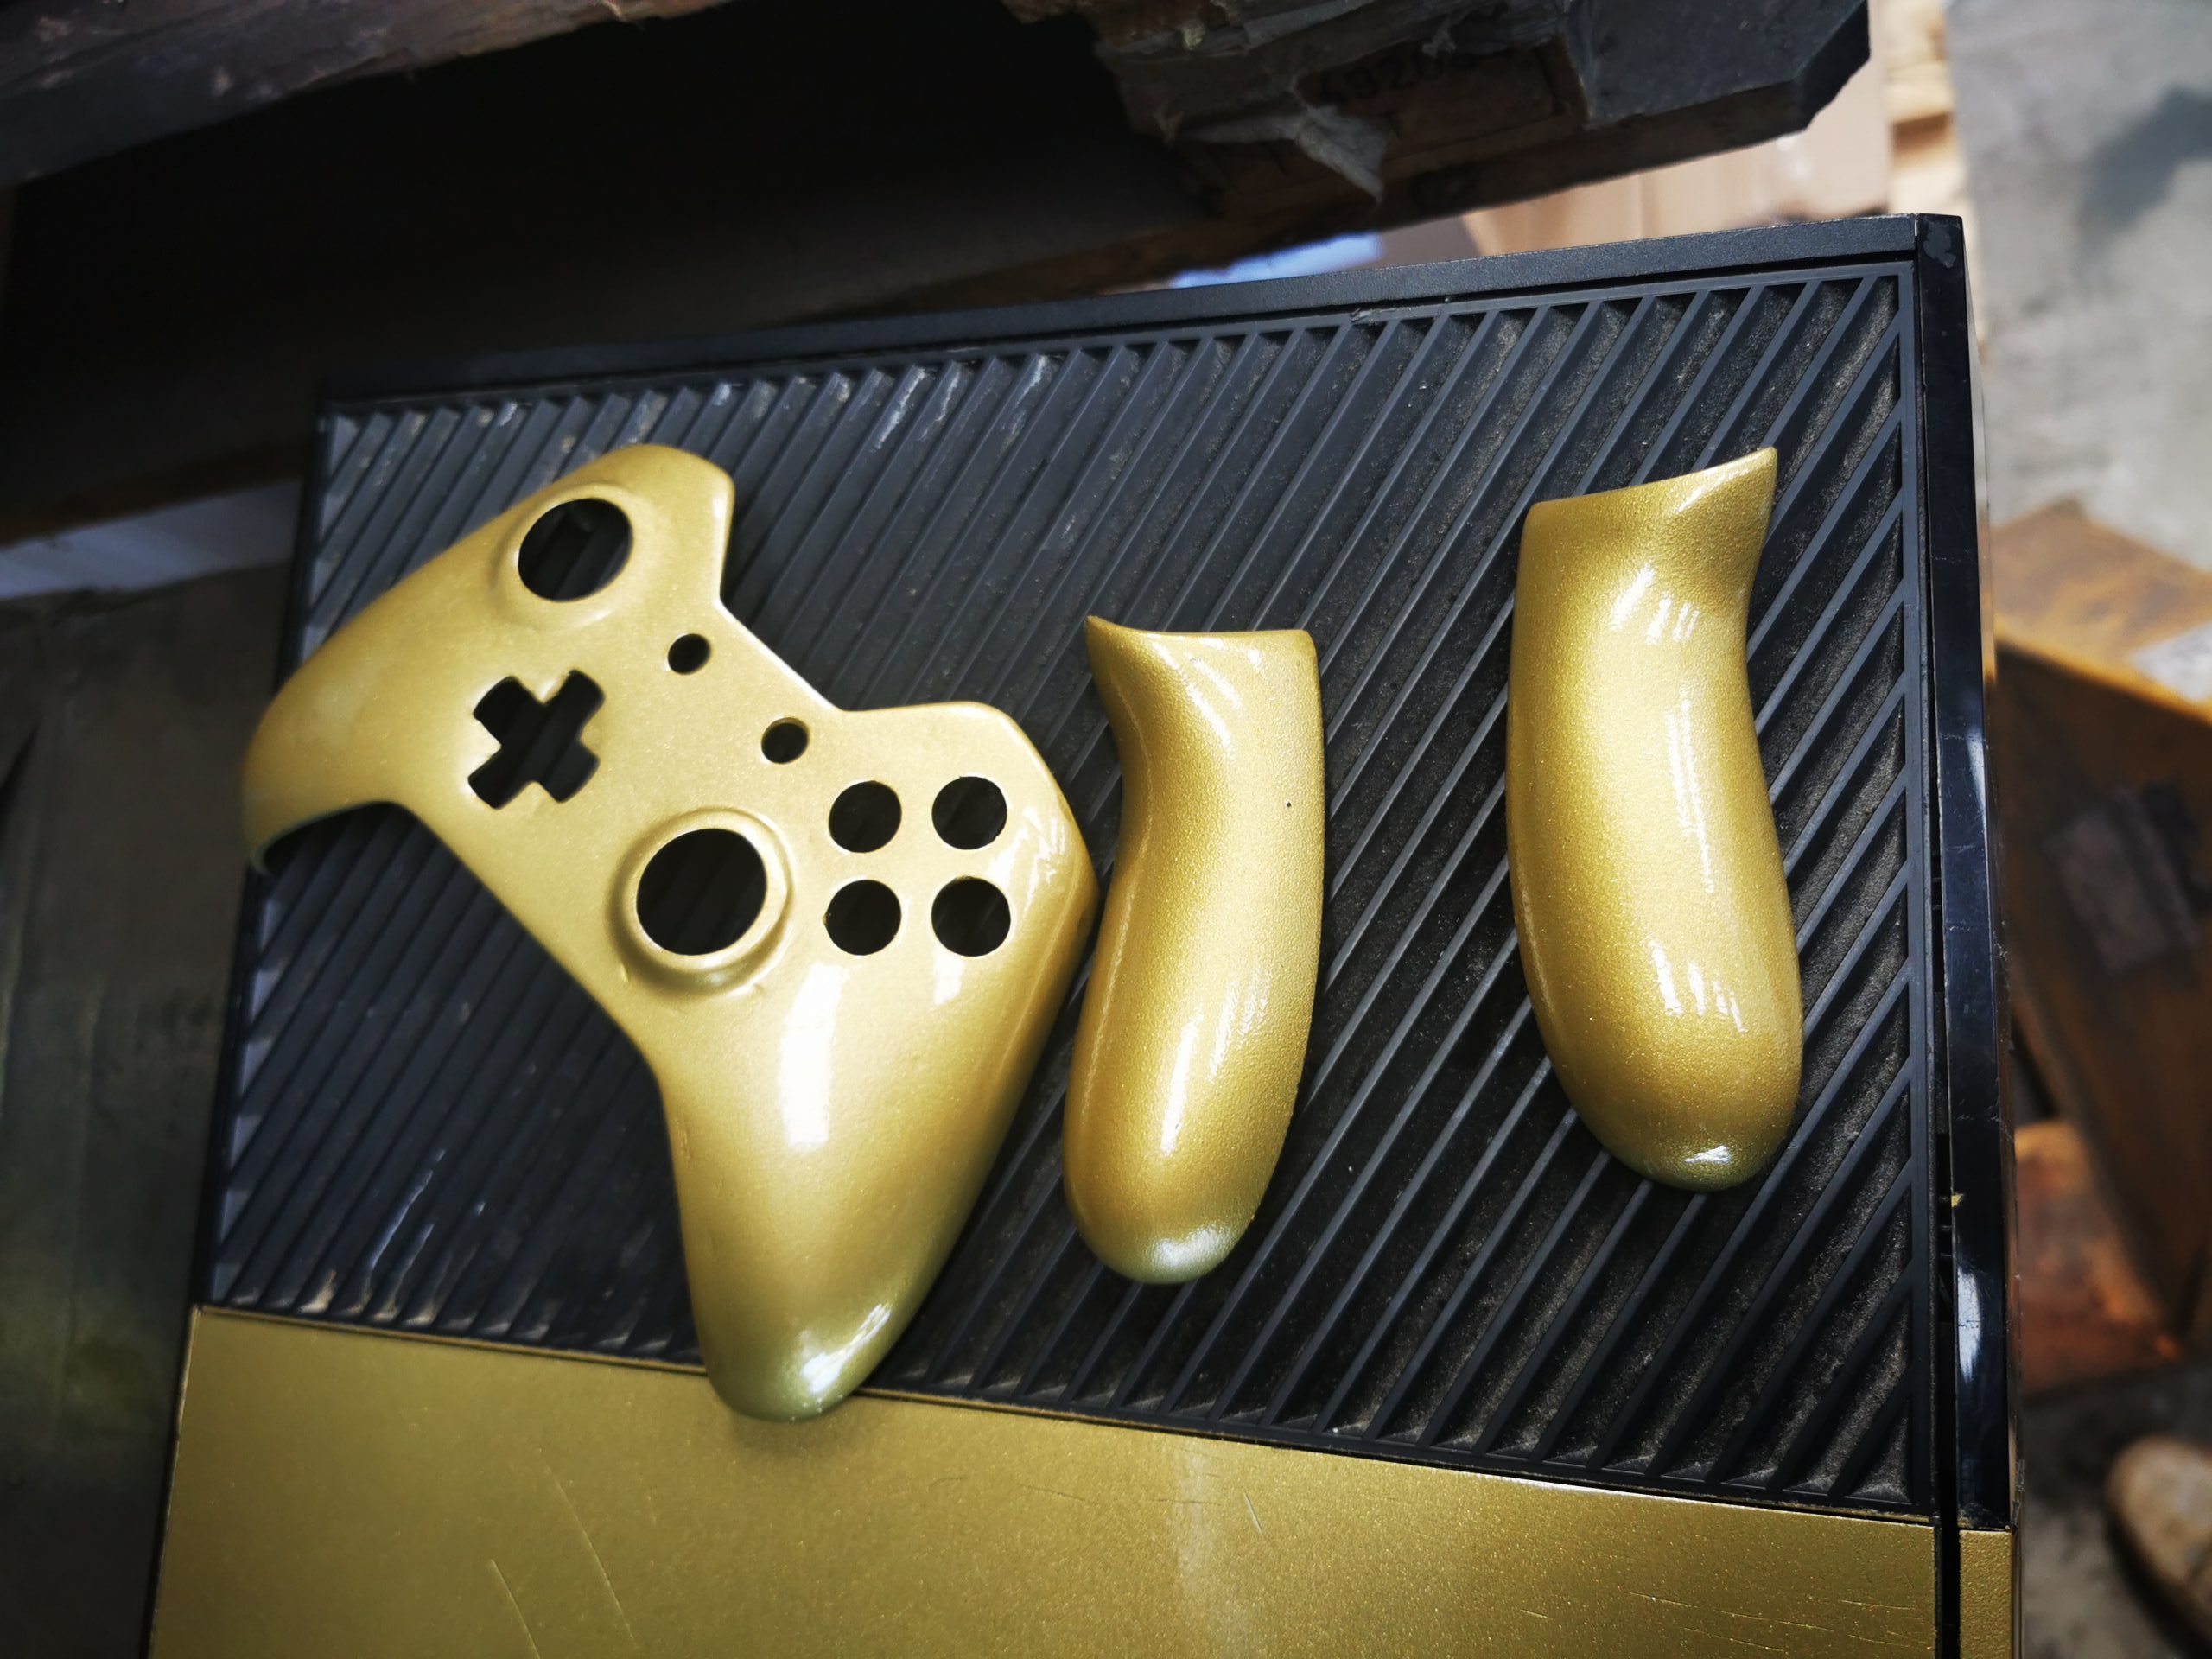 finished gold controllers